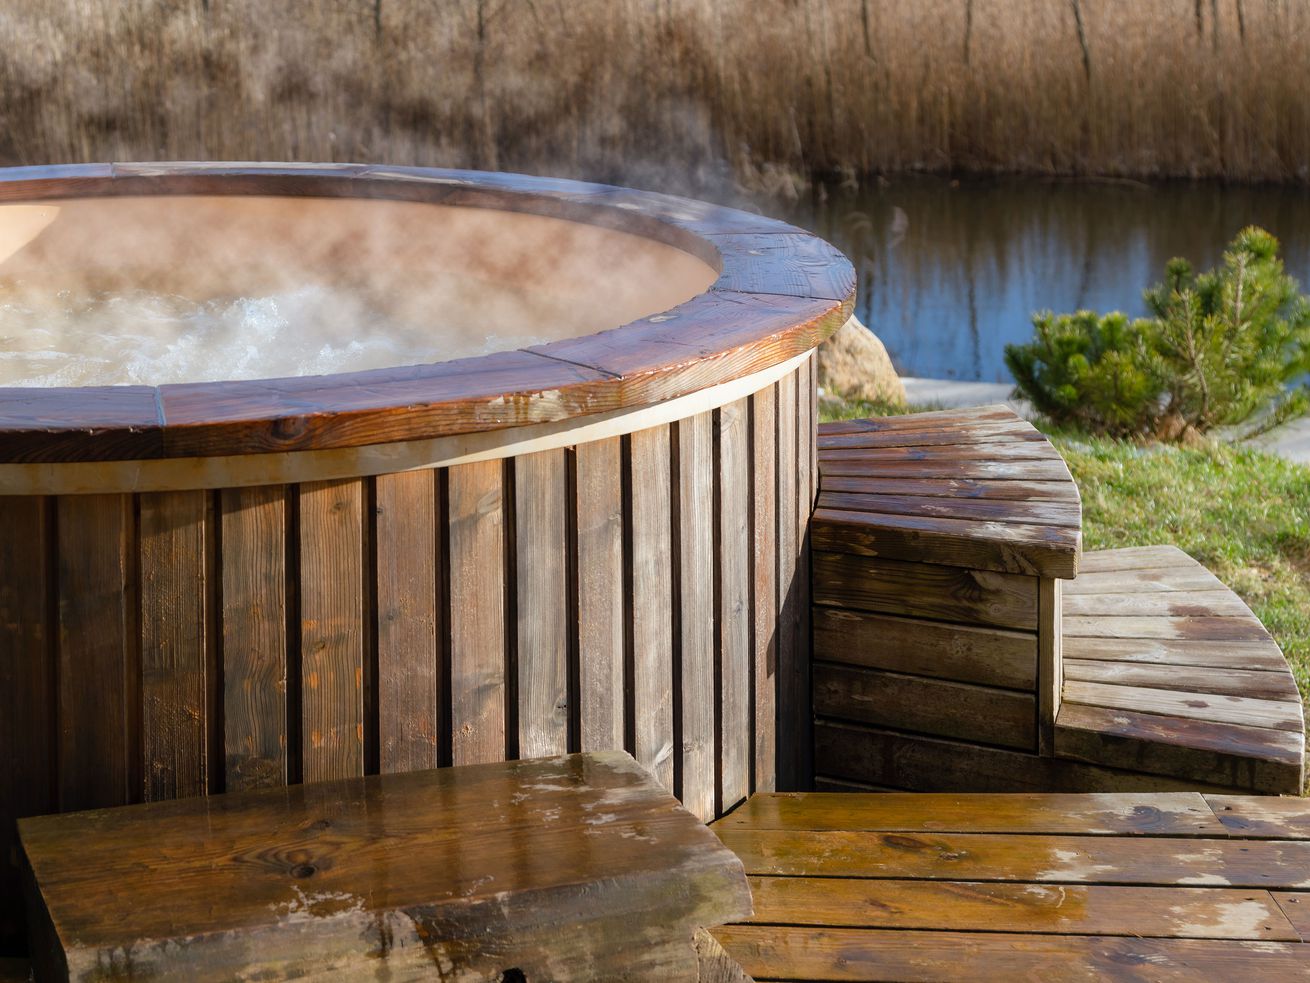 A round, wooden hot tub bubbles and steams next to a wet deck. 